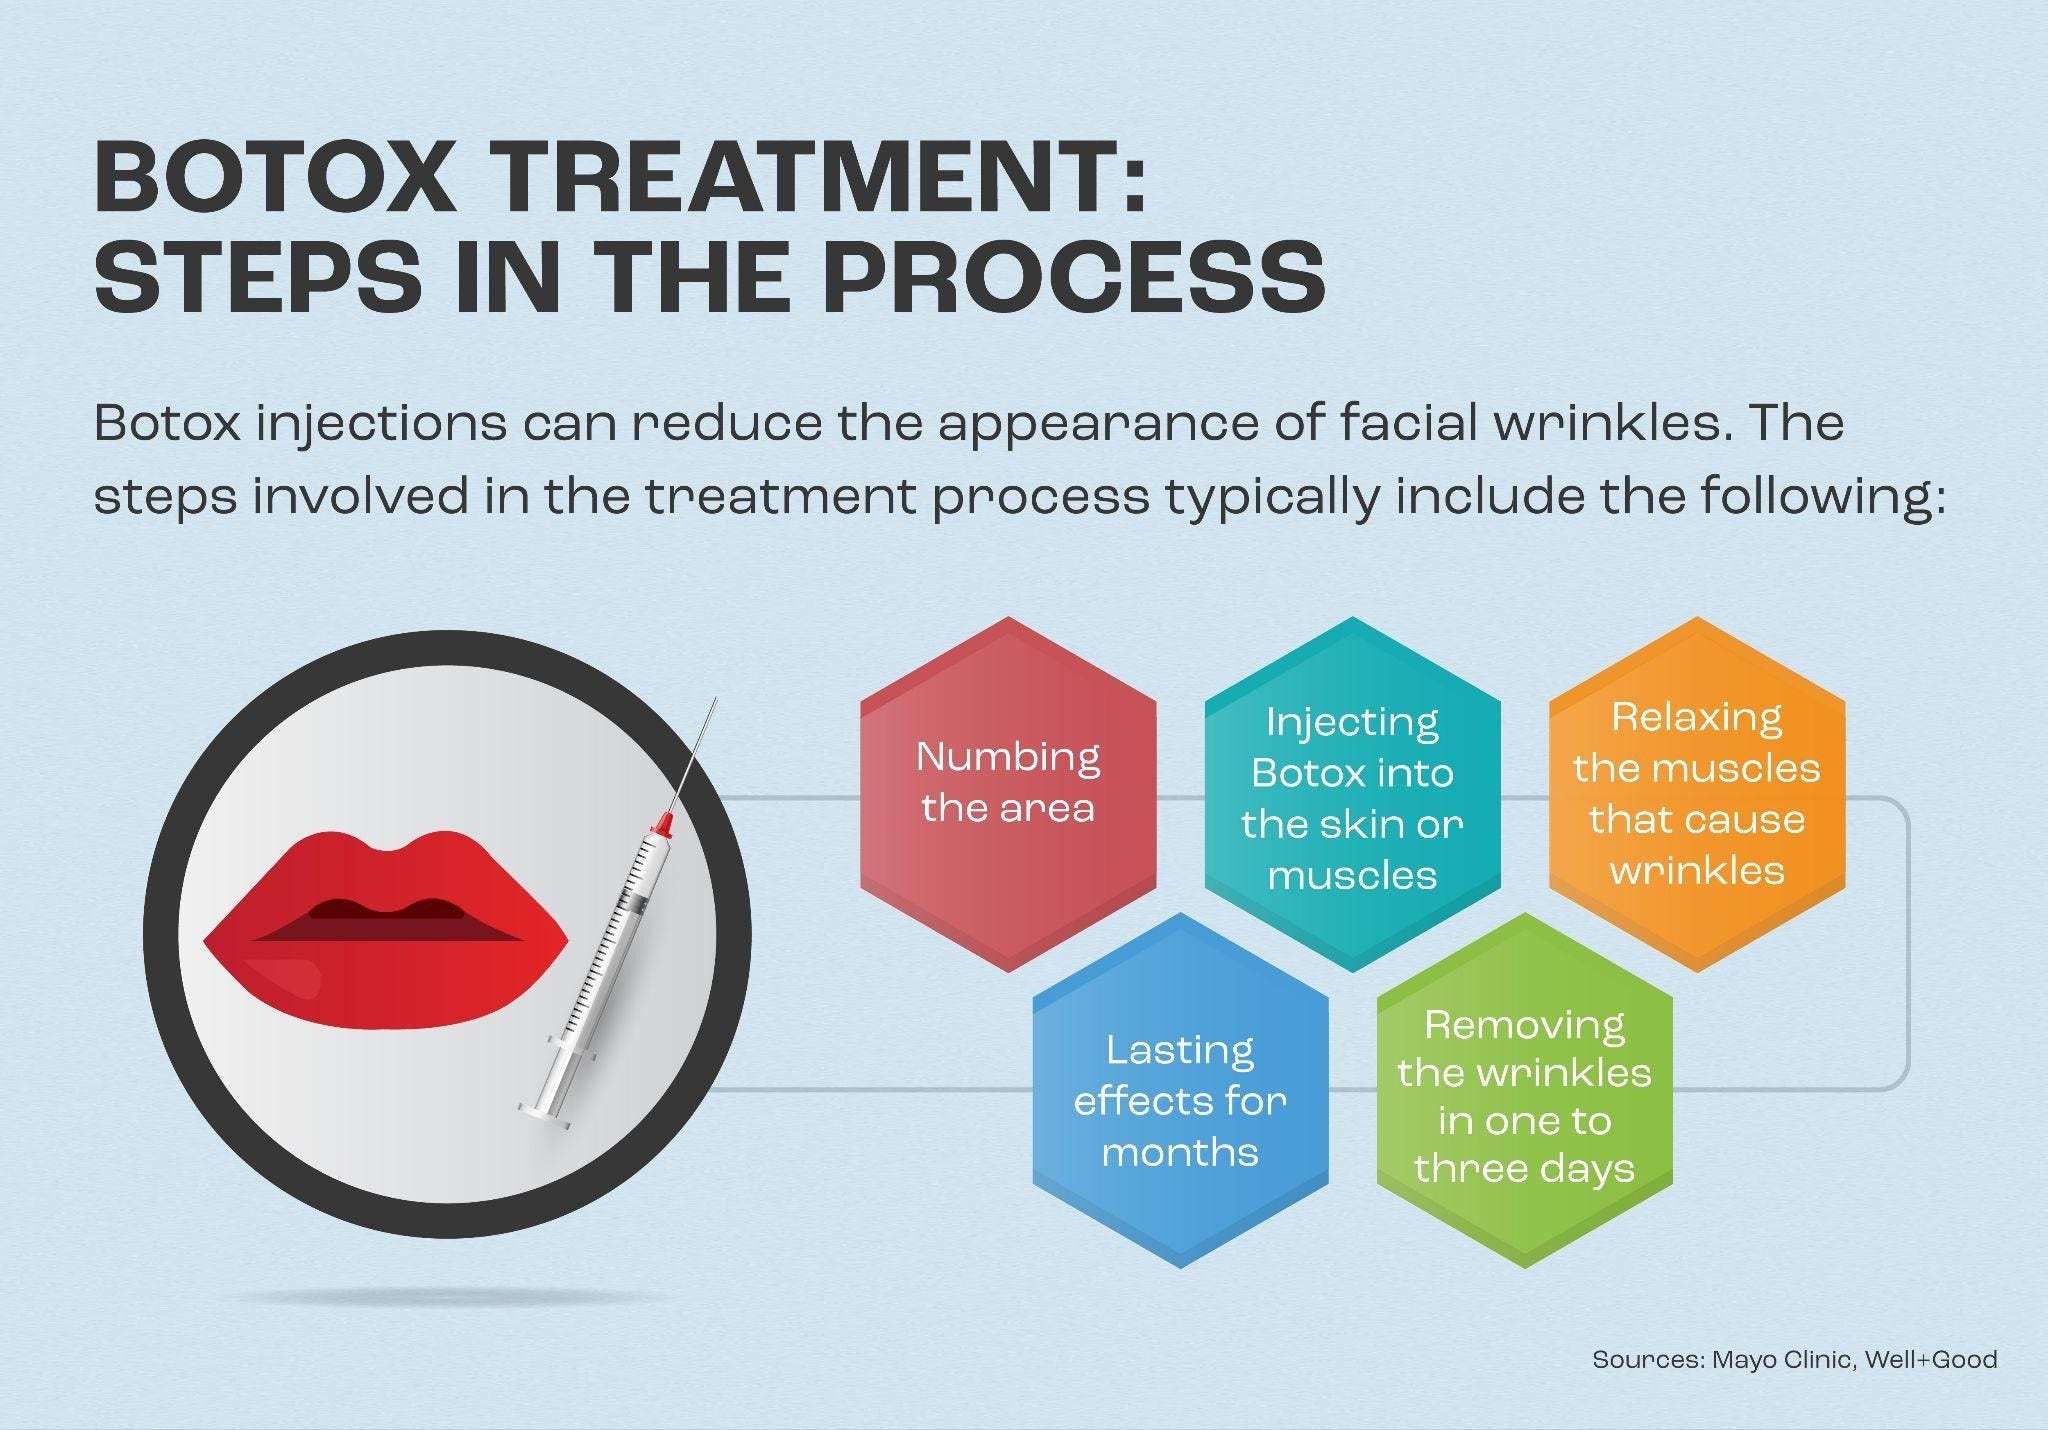 The steps of Botox treatment.